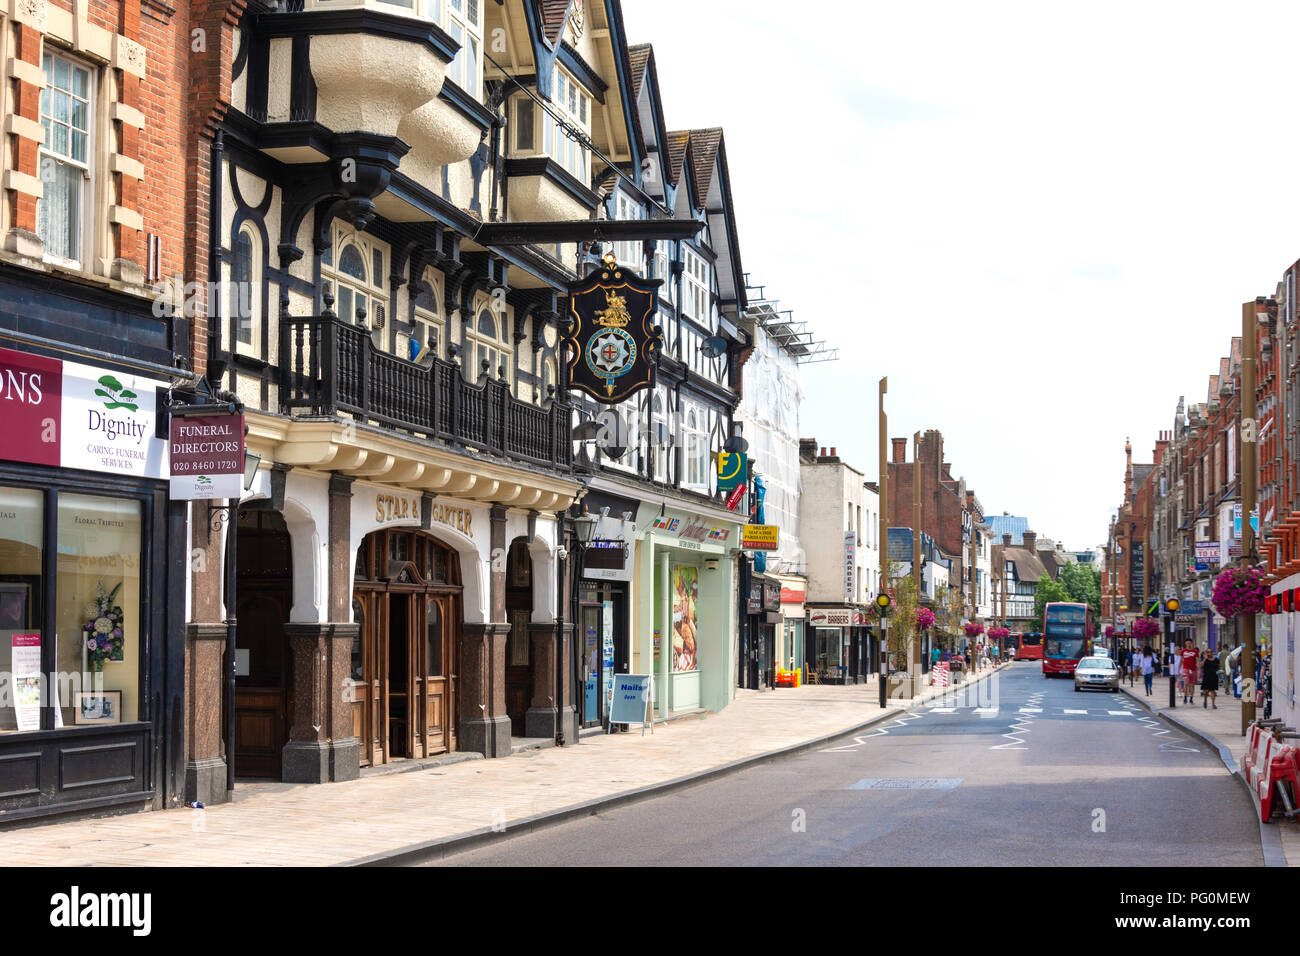 High Street, Bromley, London Borough of Bromley, Greater London, Angleterre, Royaume-Uni Banque D'Images